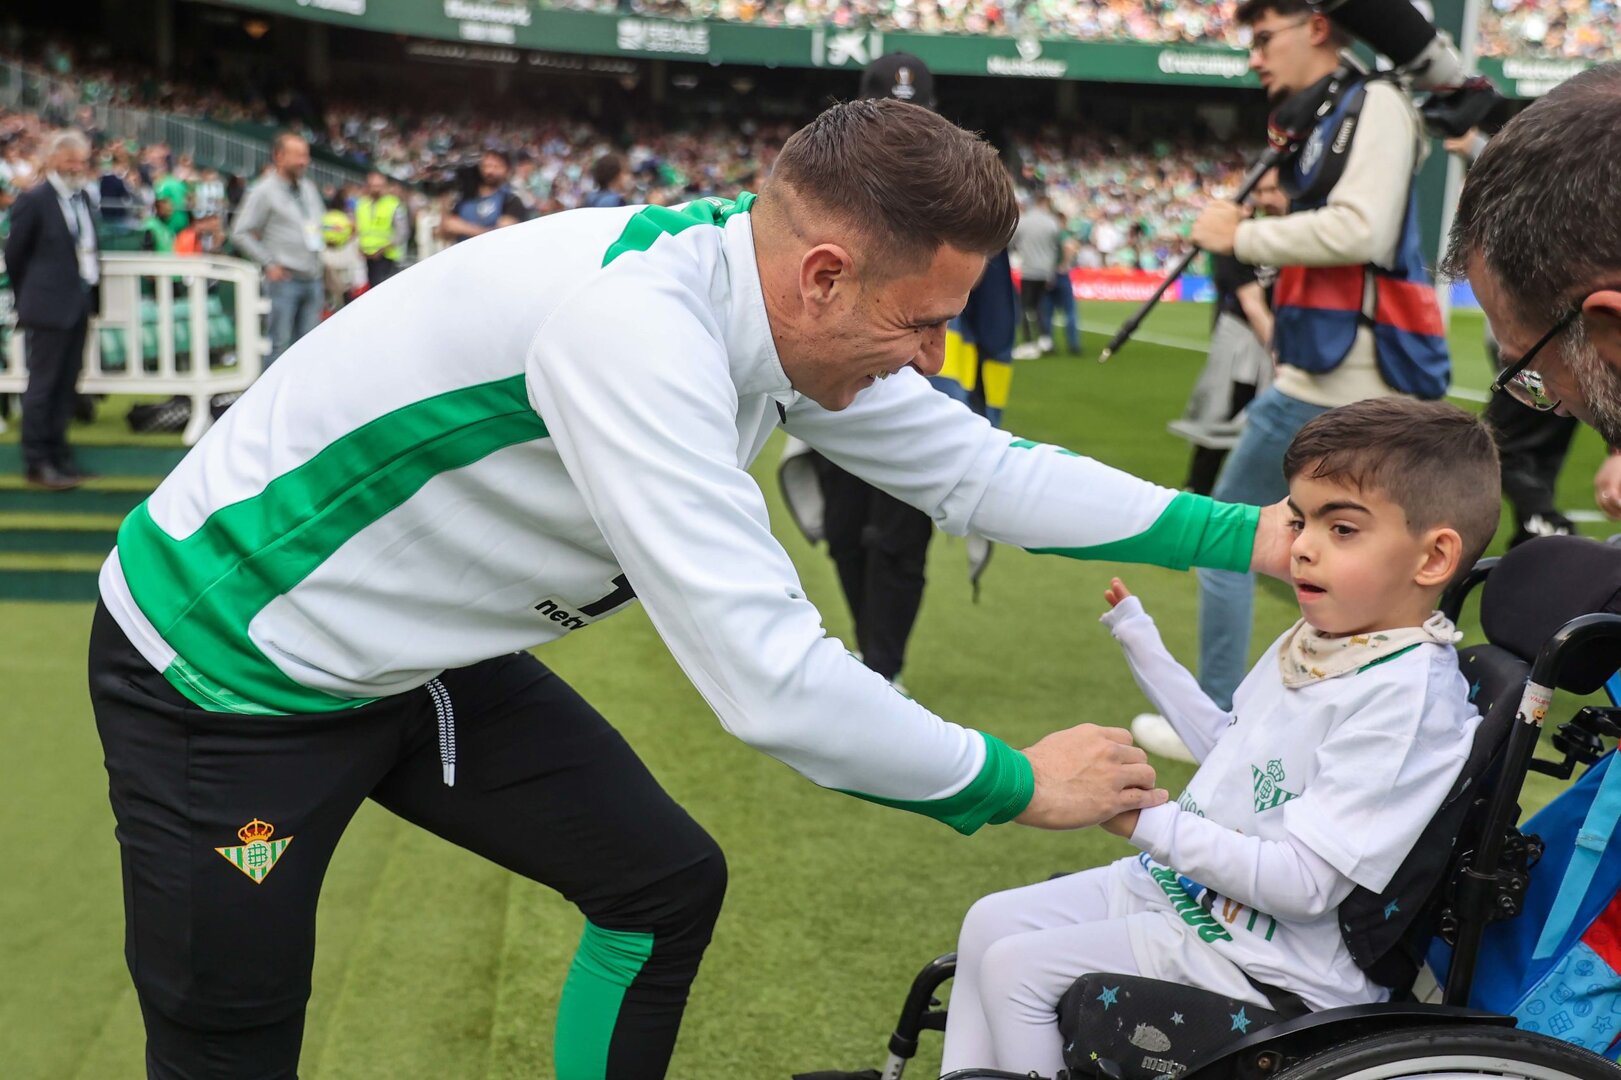 Real Betis host the most inclusive match ever, beating the world record for stadium attendance of people with functional diversity